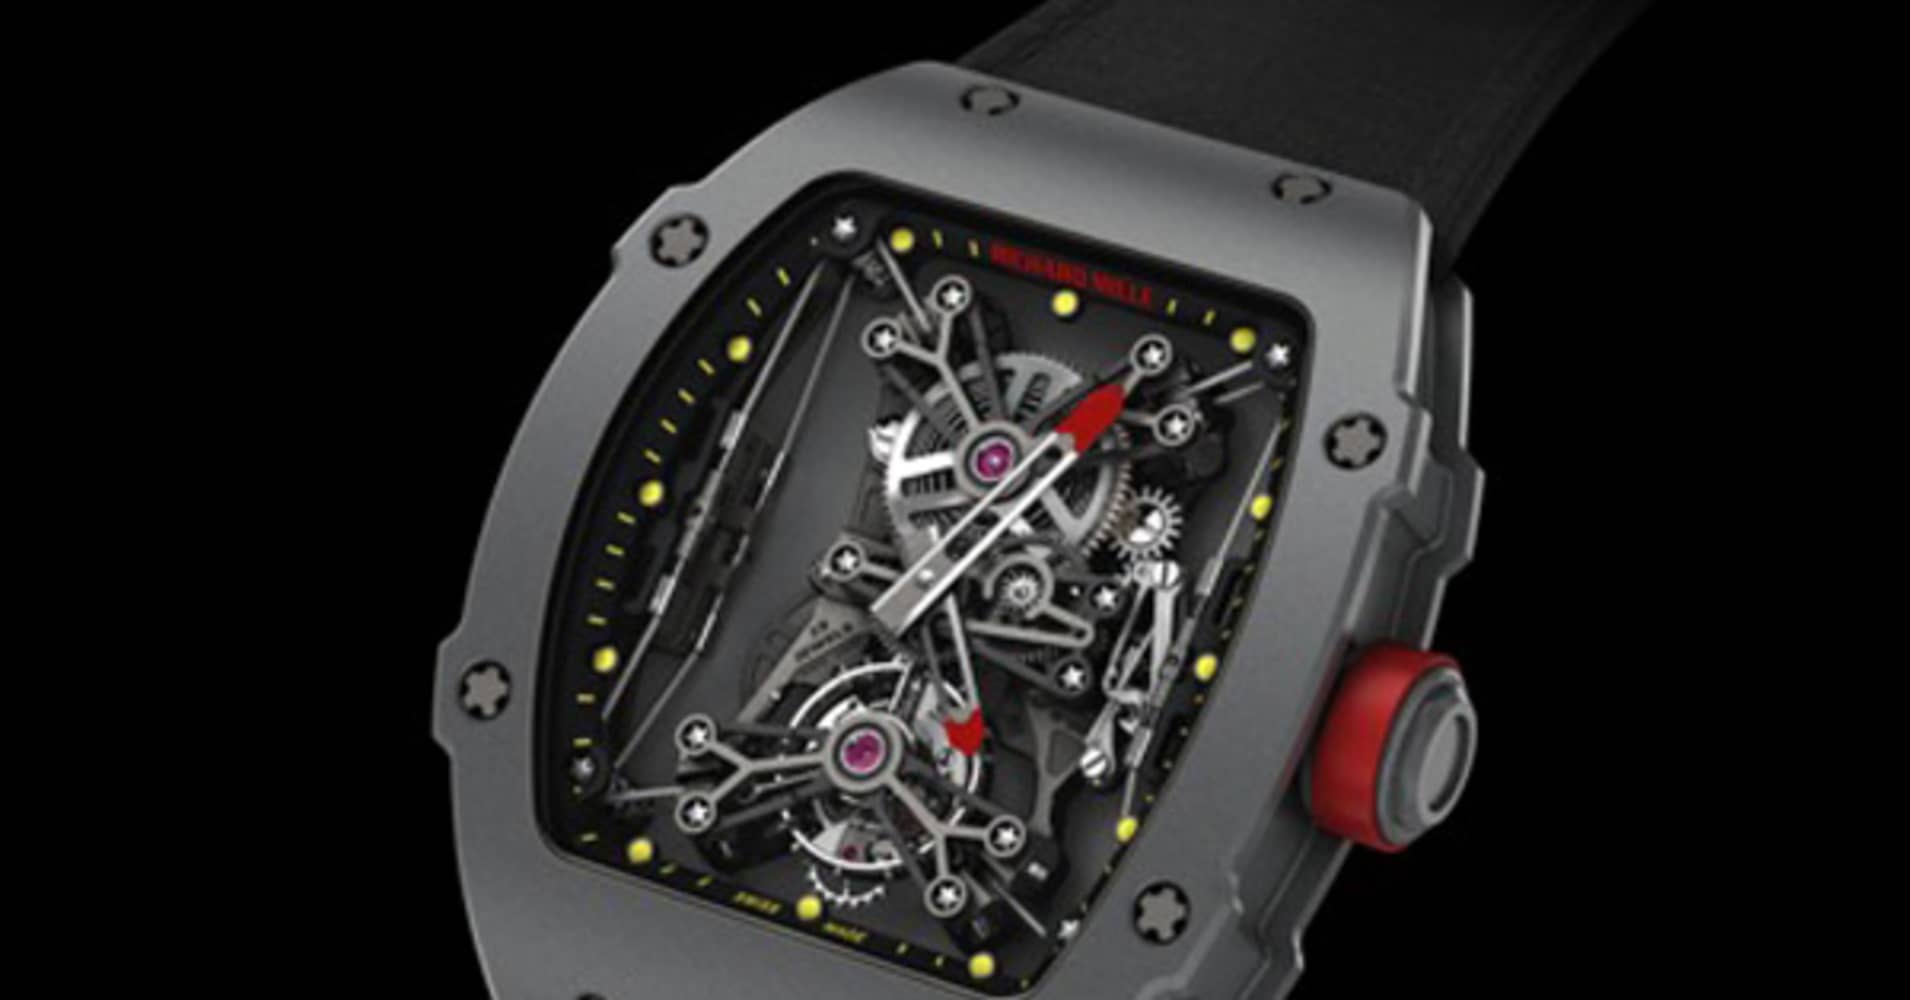 Rafael Nadal's $690,000 watch is now part of his game1910 x 1000